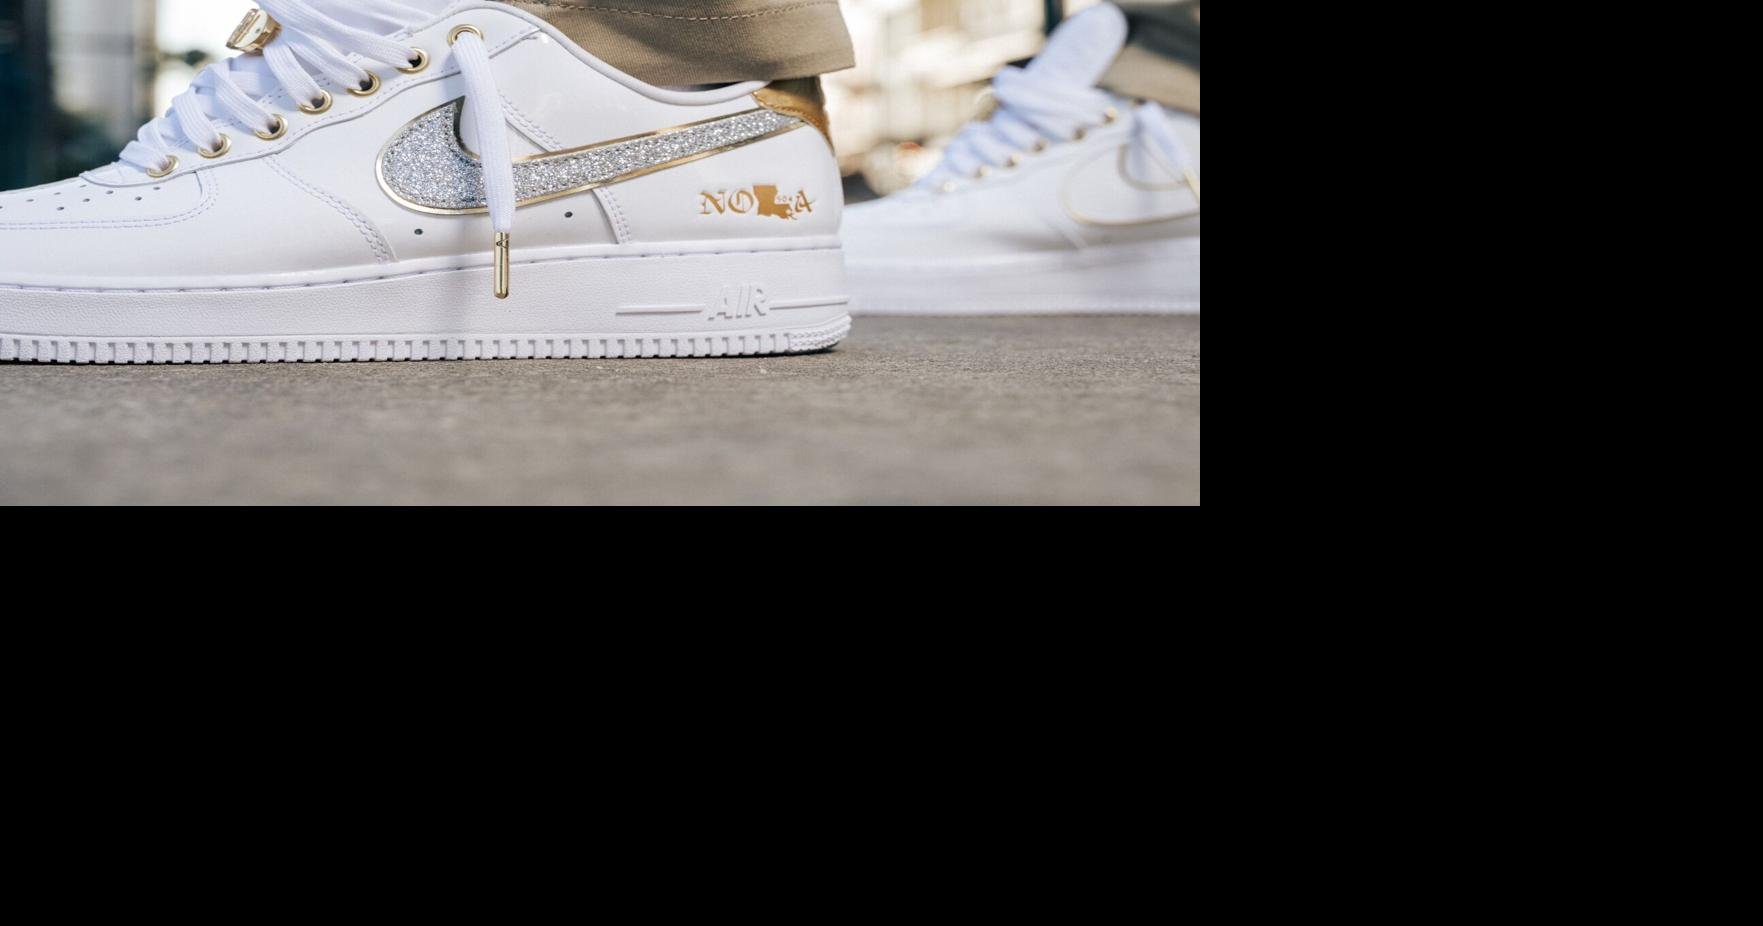 NIKE AIR FORCE 1 GETS SPECIAL EDITION AT ITS 40-YEAR ANNIVERSARY